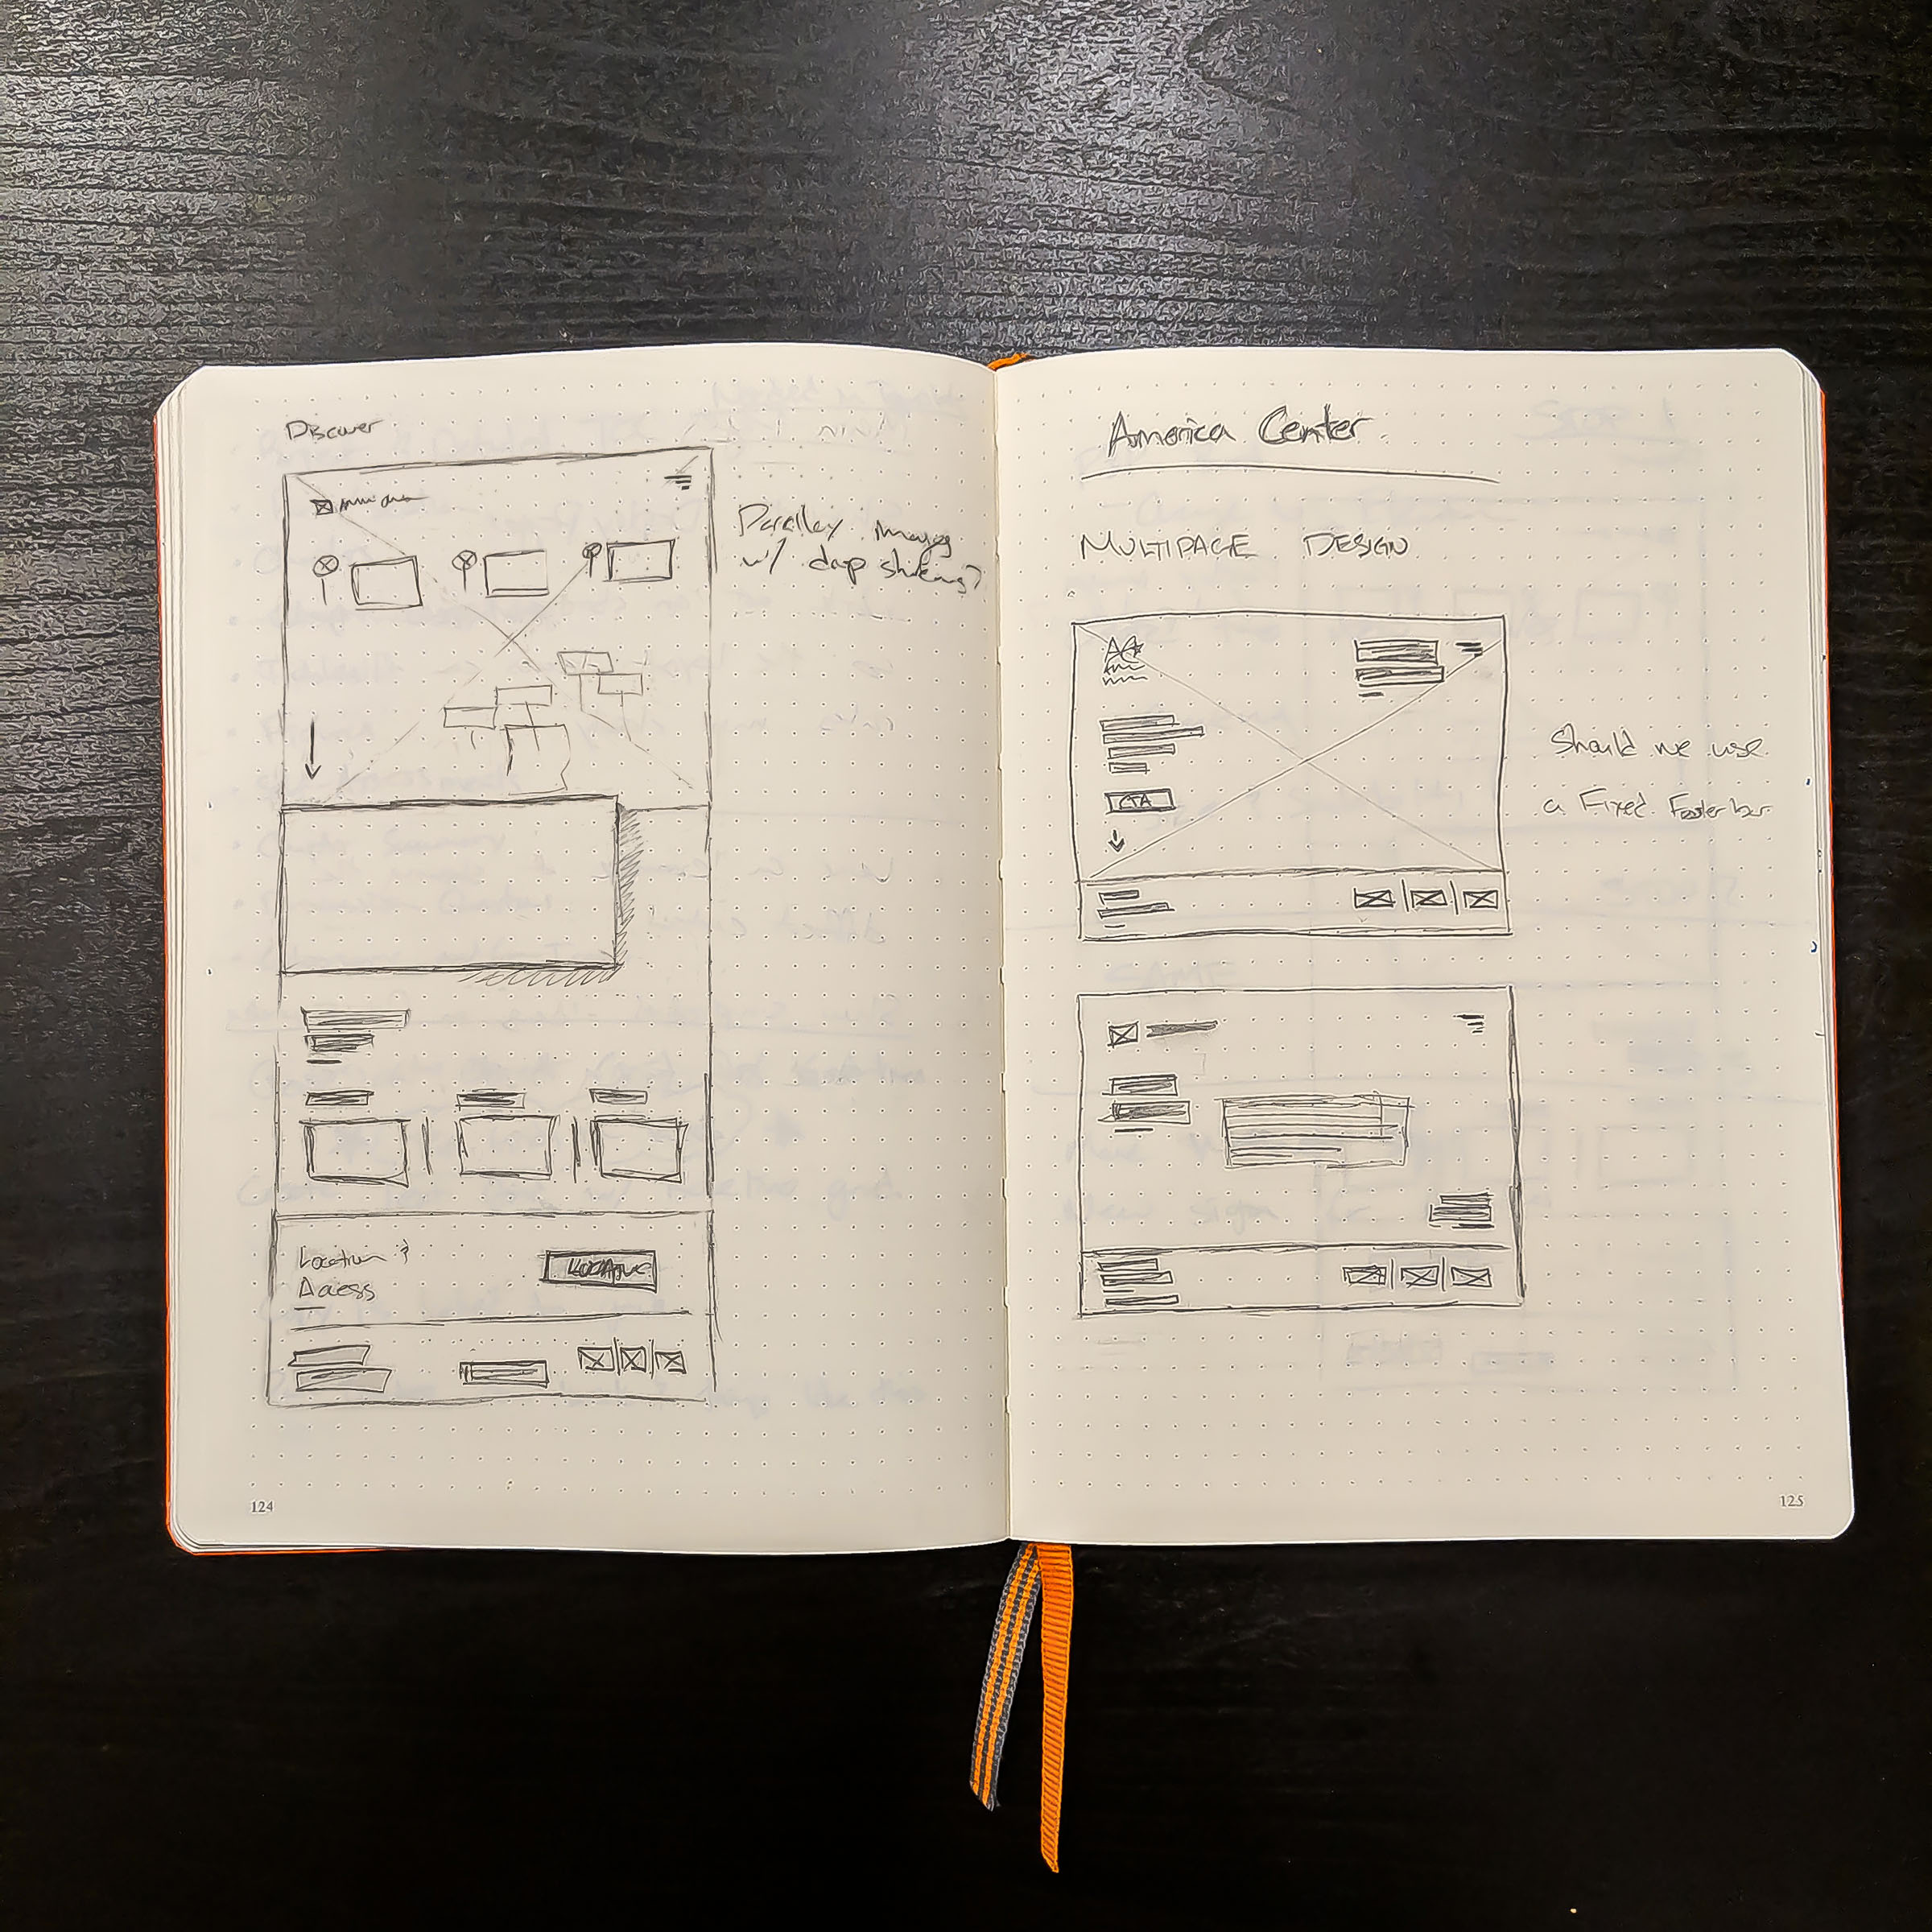 Initial sketch of website for multipage design. After further sketching, single scrolling site was found to be the most effective layout for this project